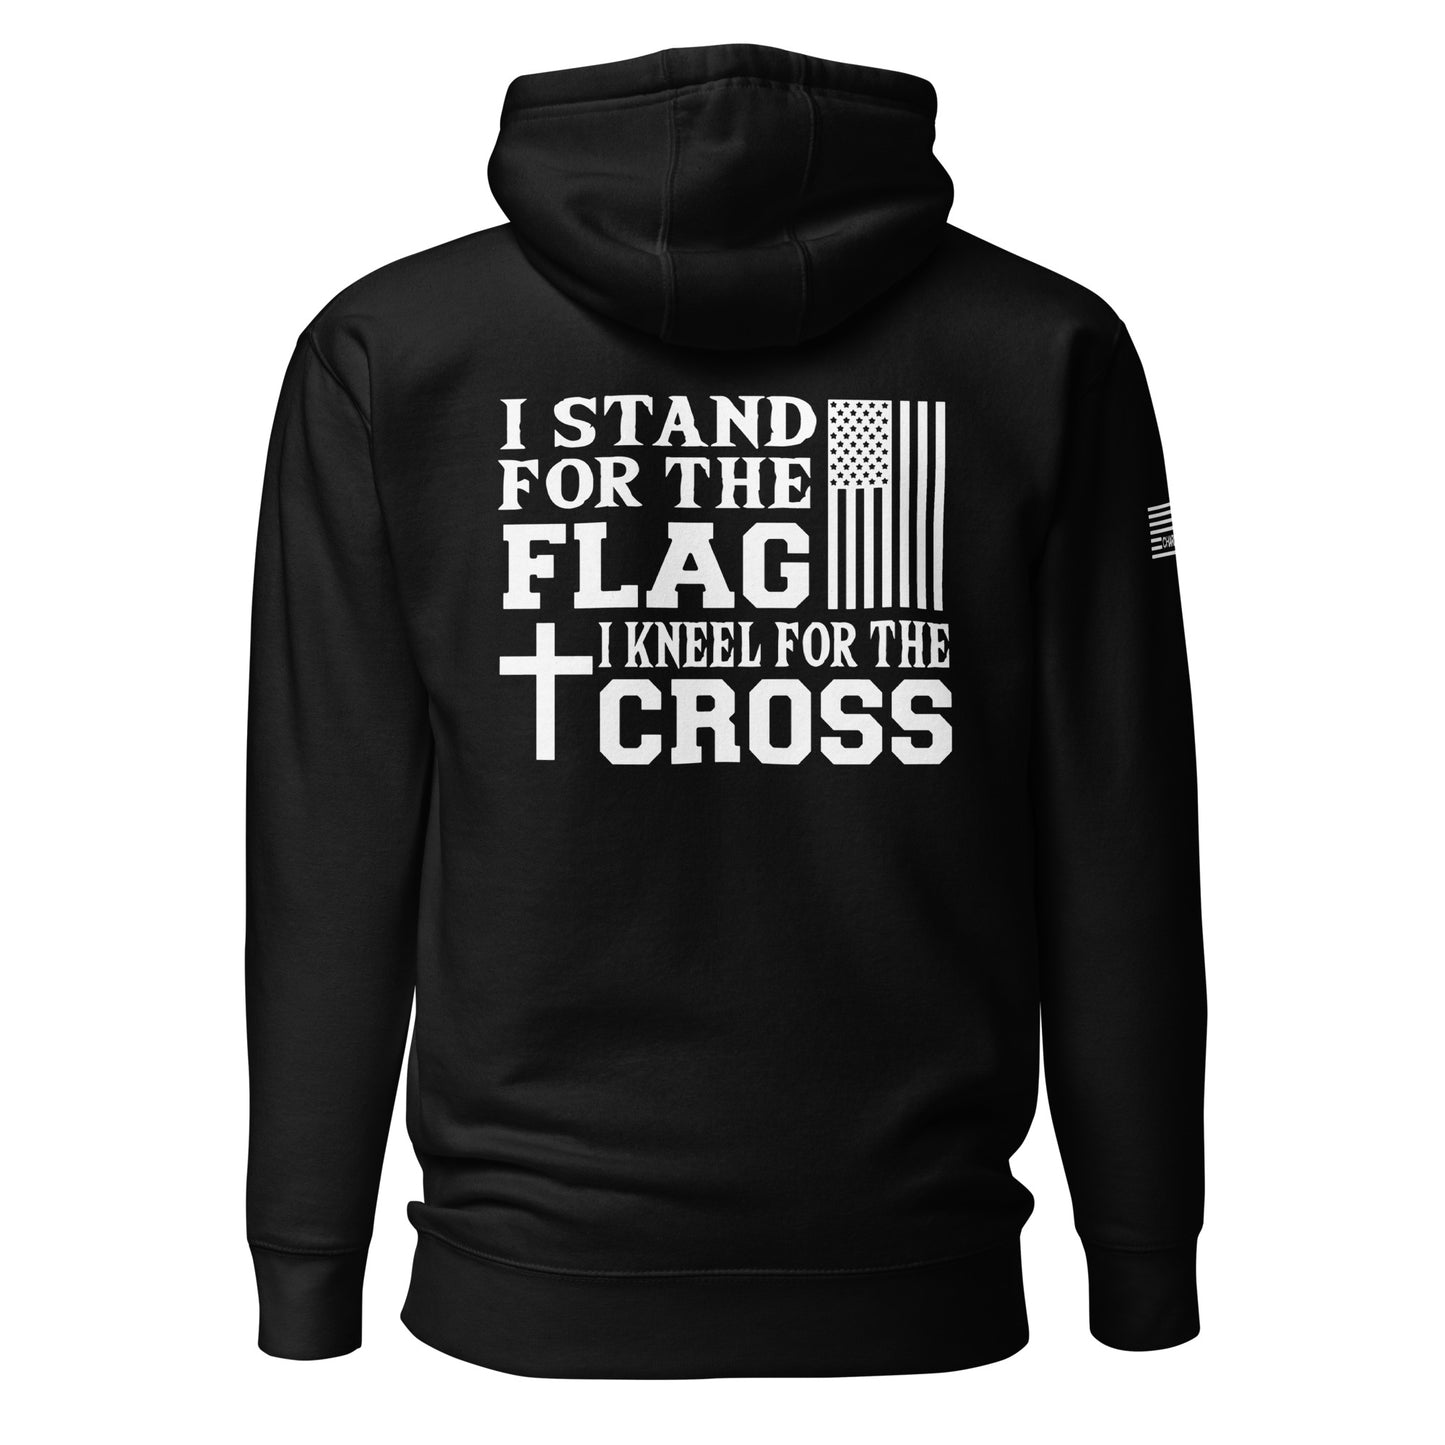 I Stand For The Flag I Kneel For The Cross Unisex Hoodie